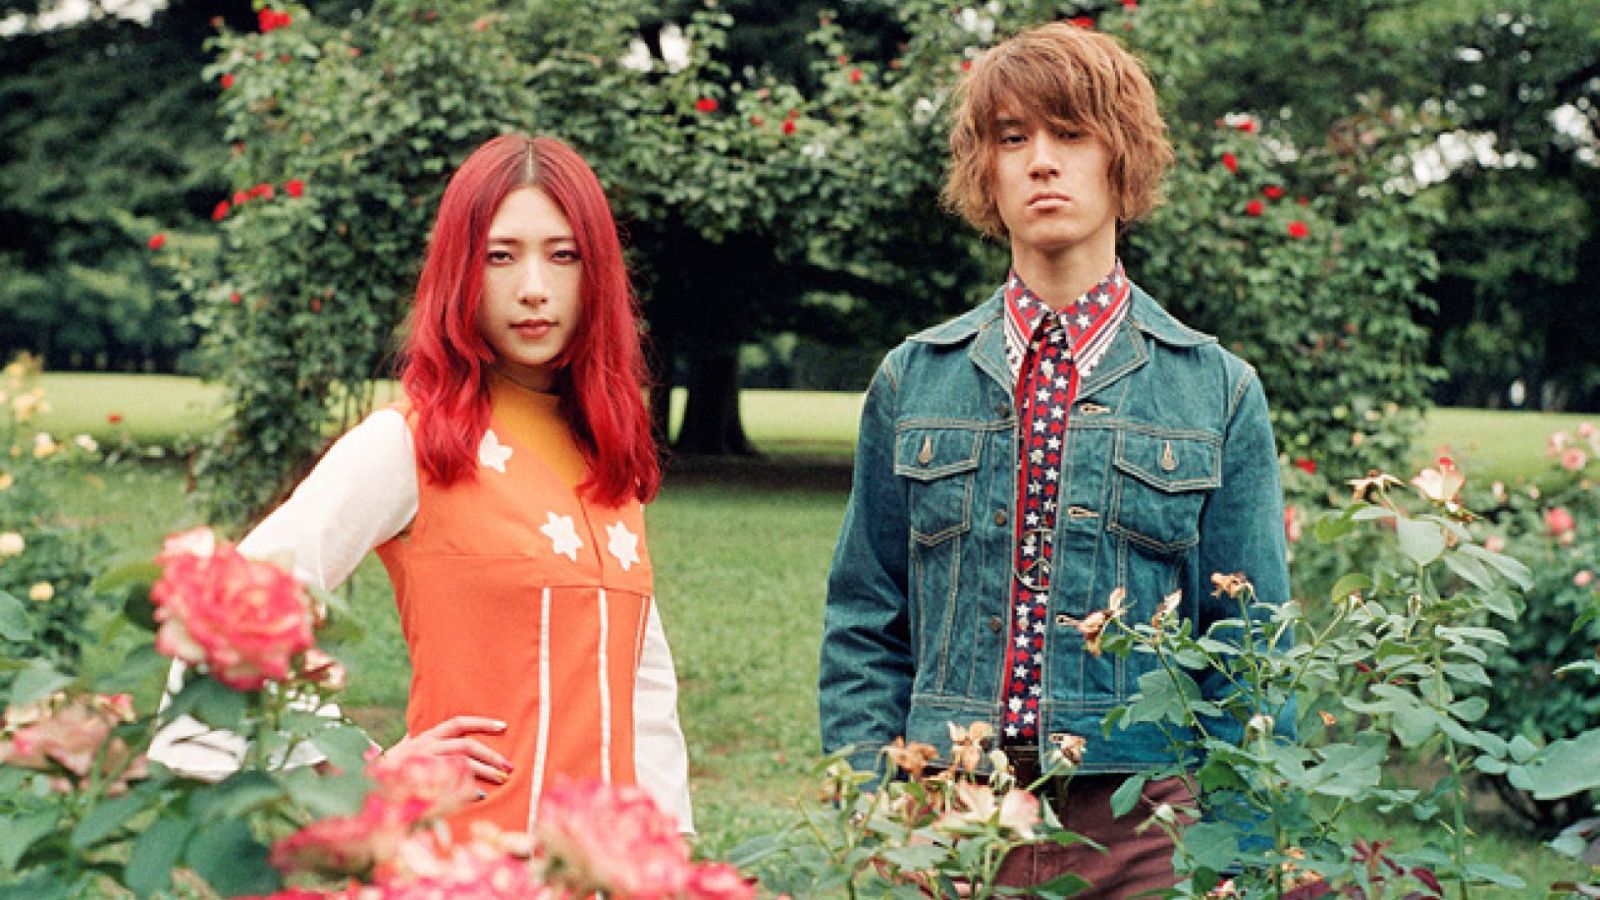 Video-Interview mit GLIM SPANKY © UNIVERSAL MUSIC LLC. All rights reserved.